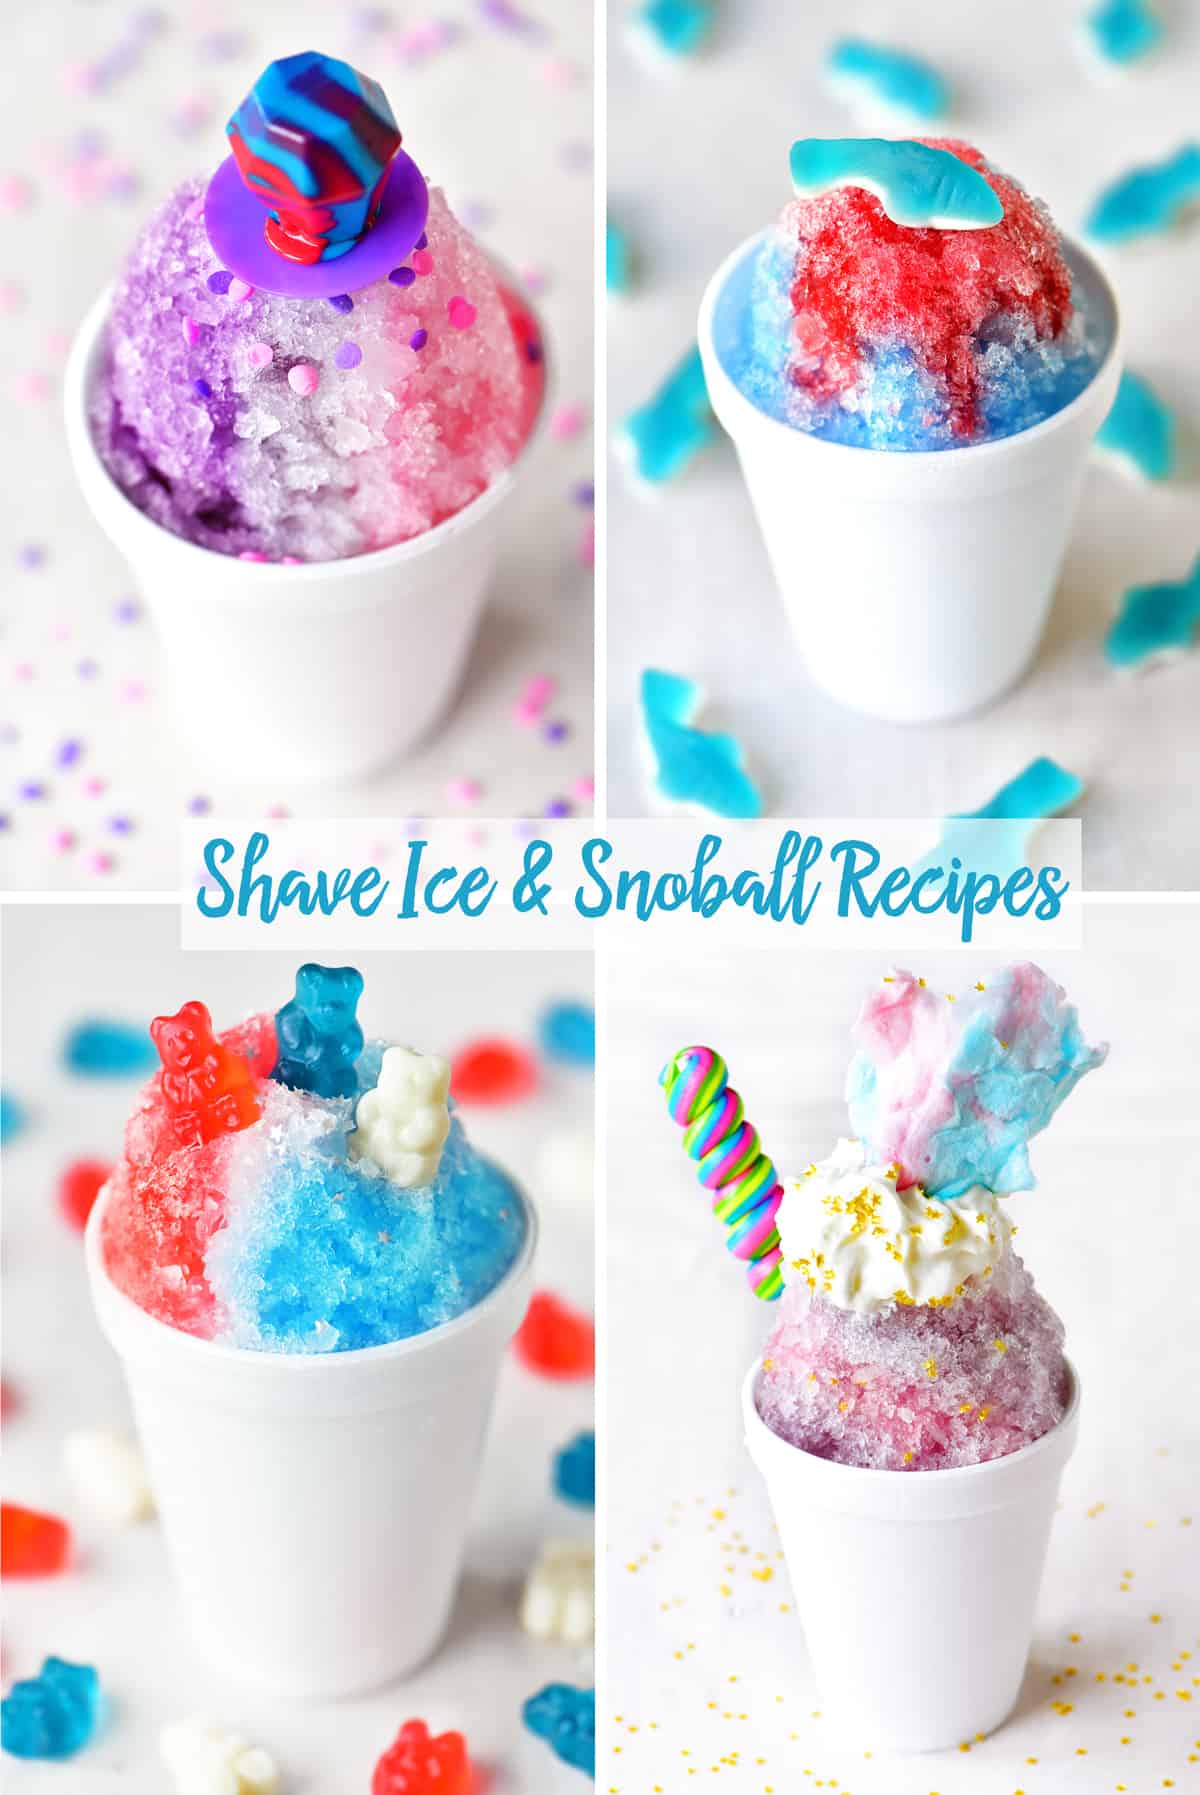 https://www.thegunnysack.com/wp-content/uploads/2020/08/Shave-Ice-and-Snoball-Recipes.jpg